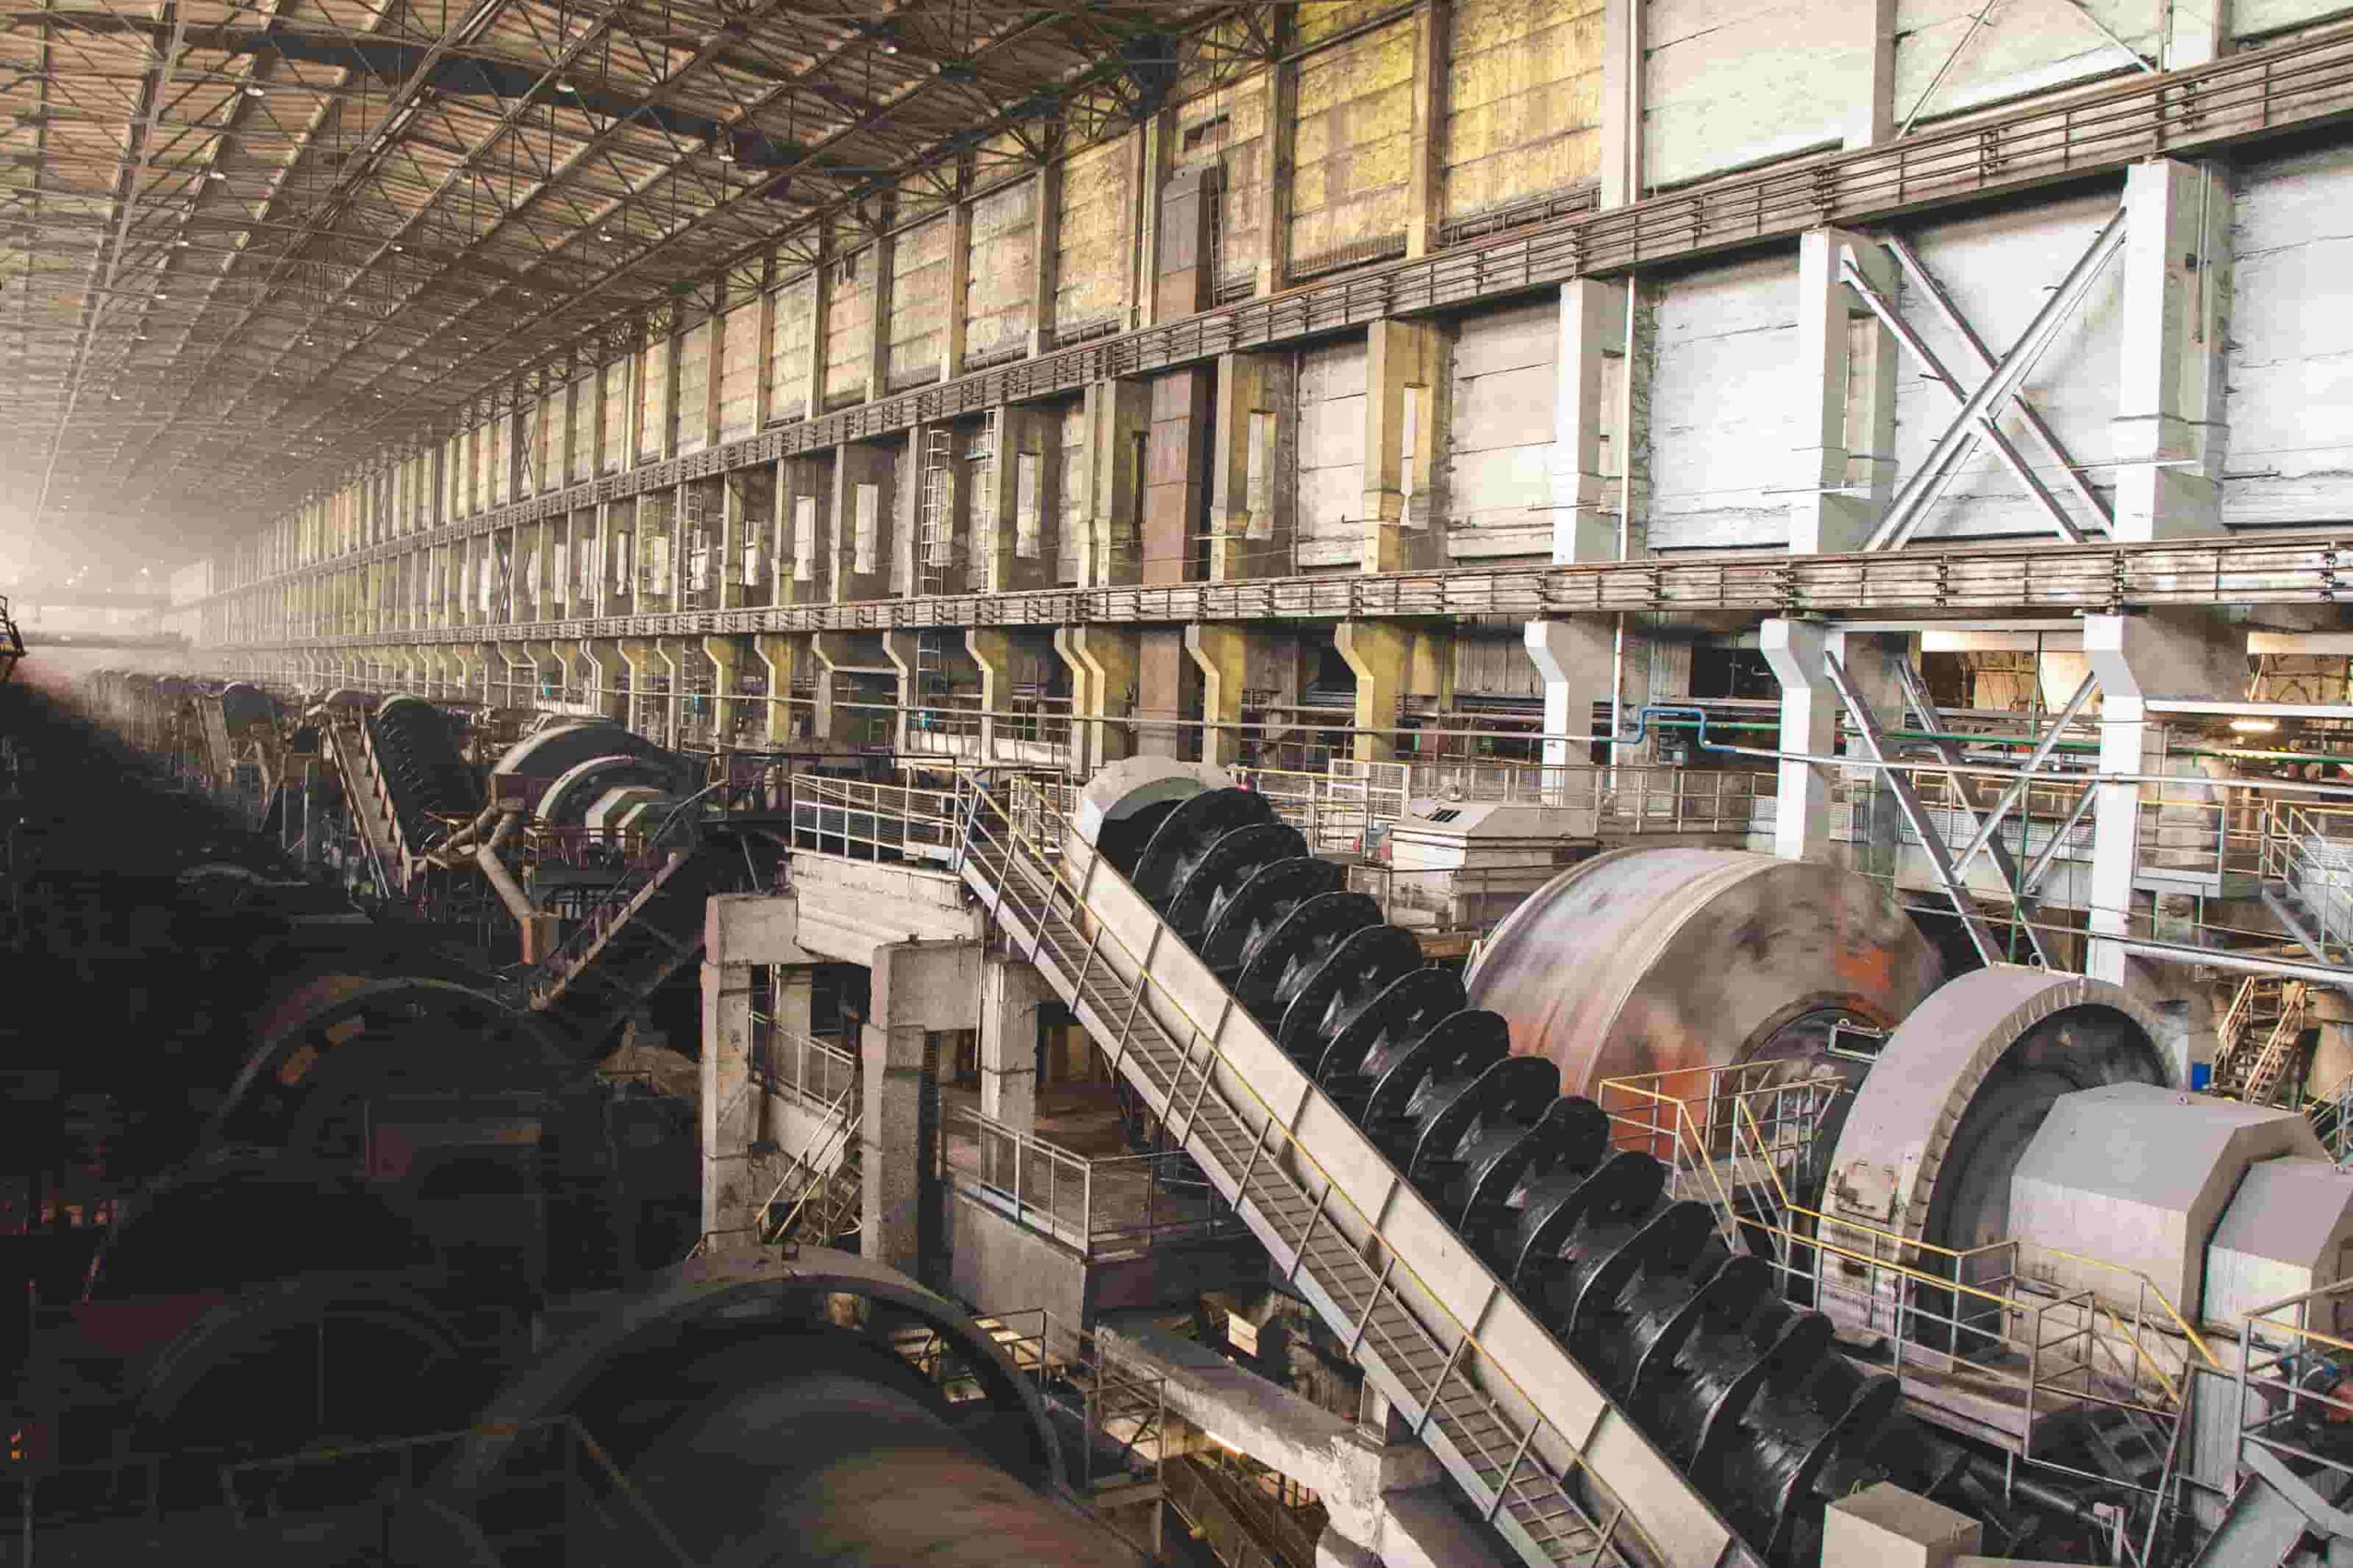 Mining equipment in a large facility